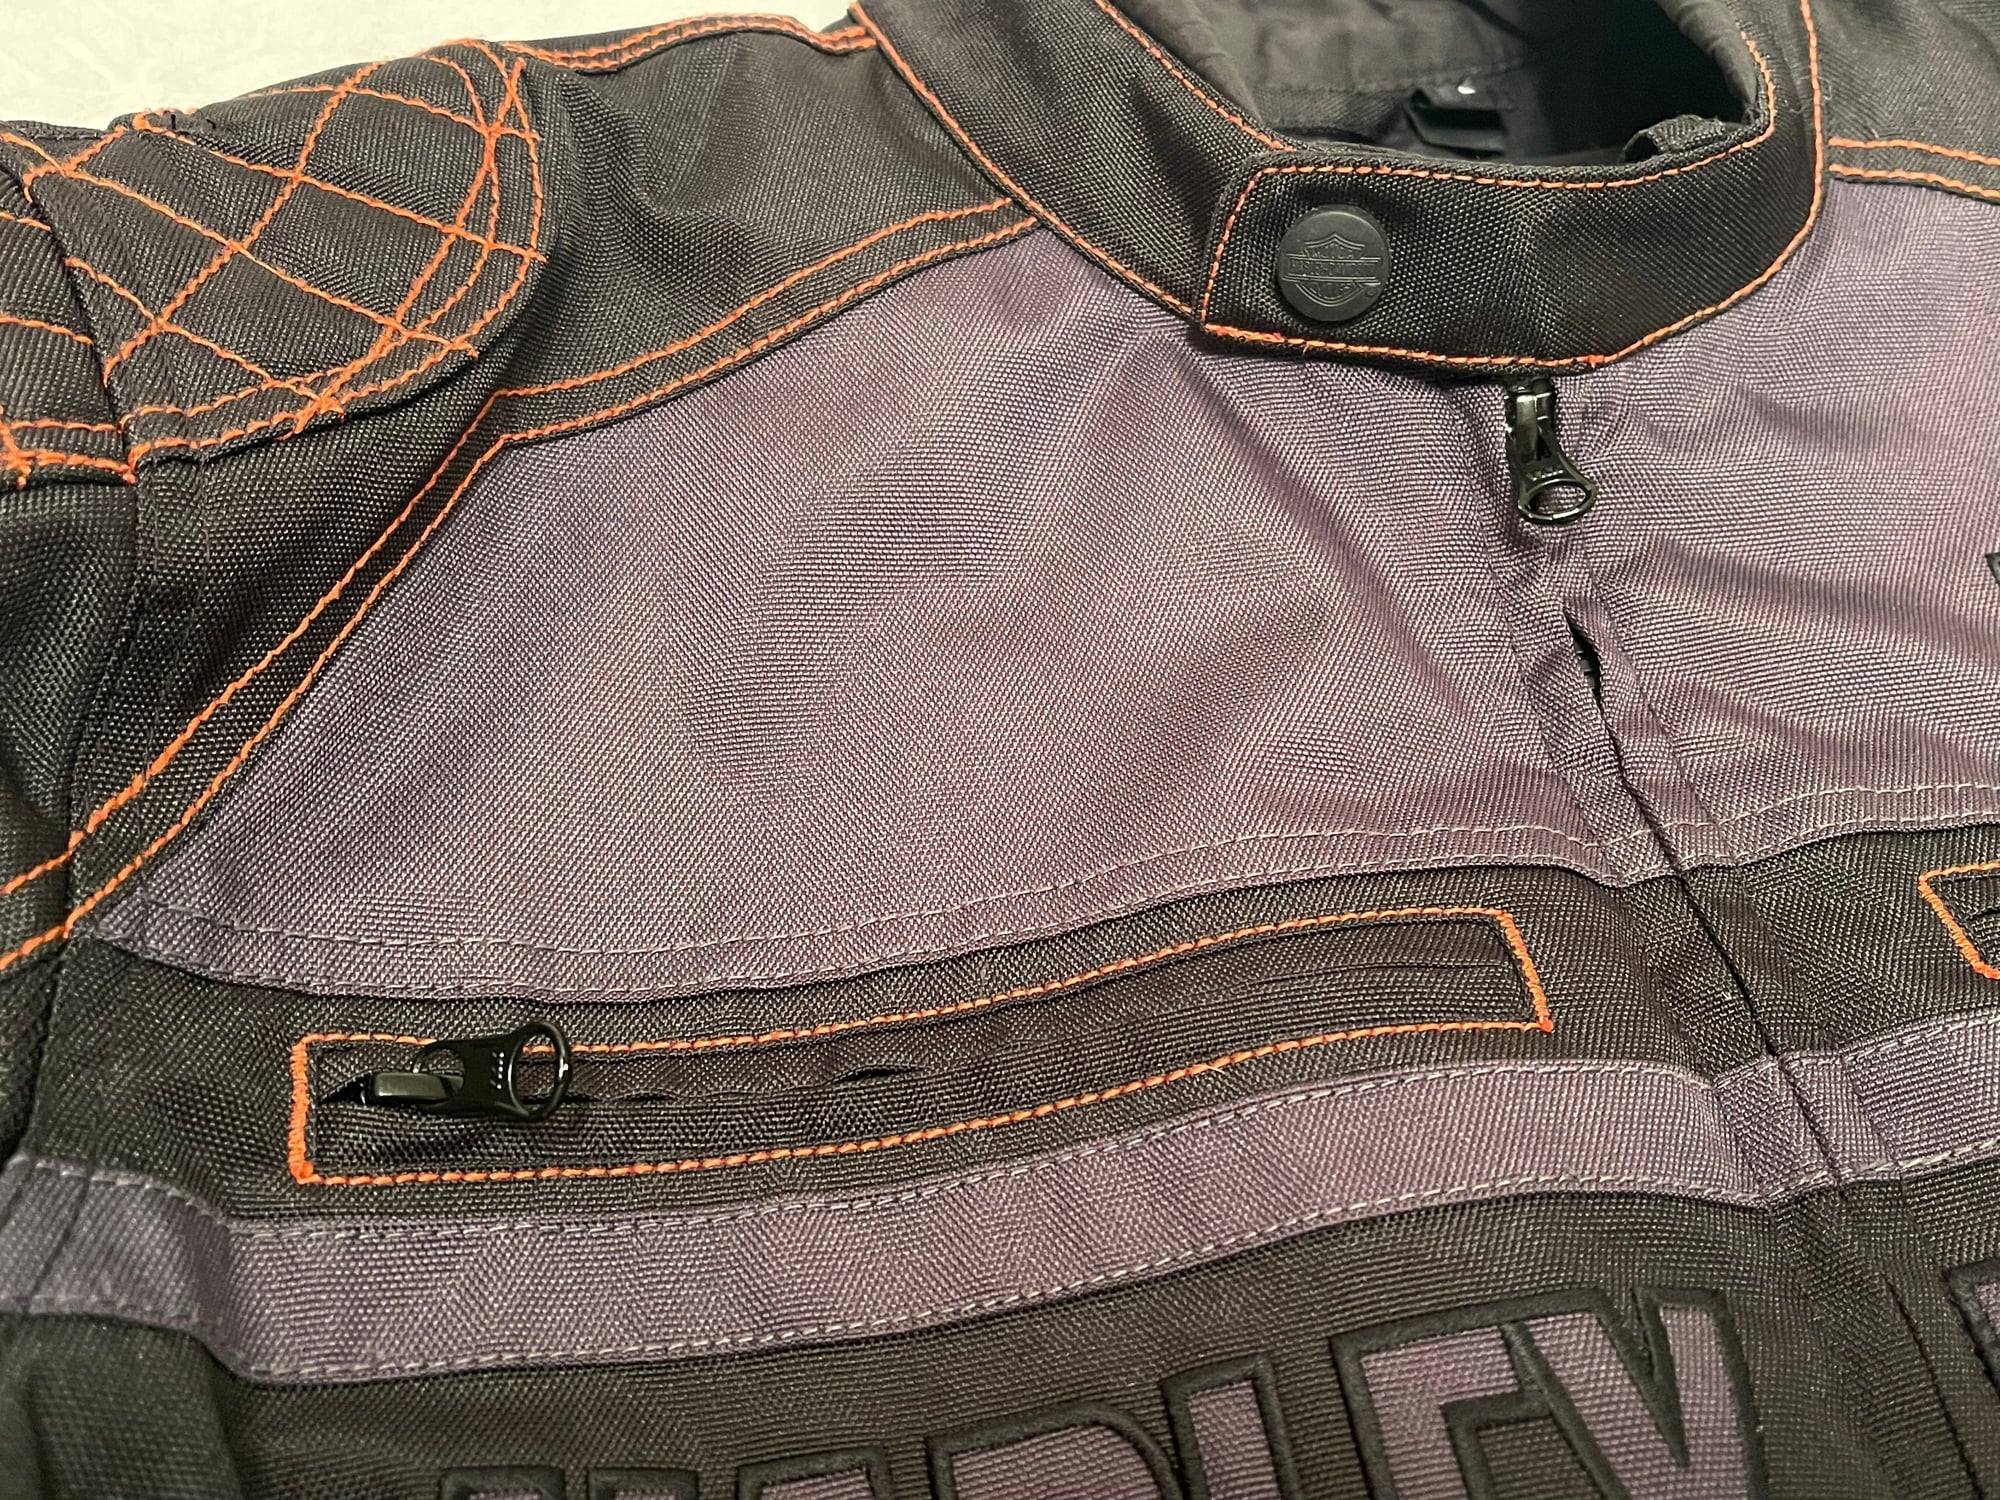 CONTENTION MESH JACKET FROM HARLEY-DAVIDSON | Born To Ride Motorcycle  Magazine – Motorcycle TV, Radio, Events, News and Motorcycle Blog